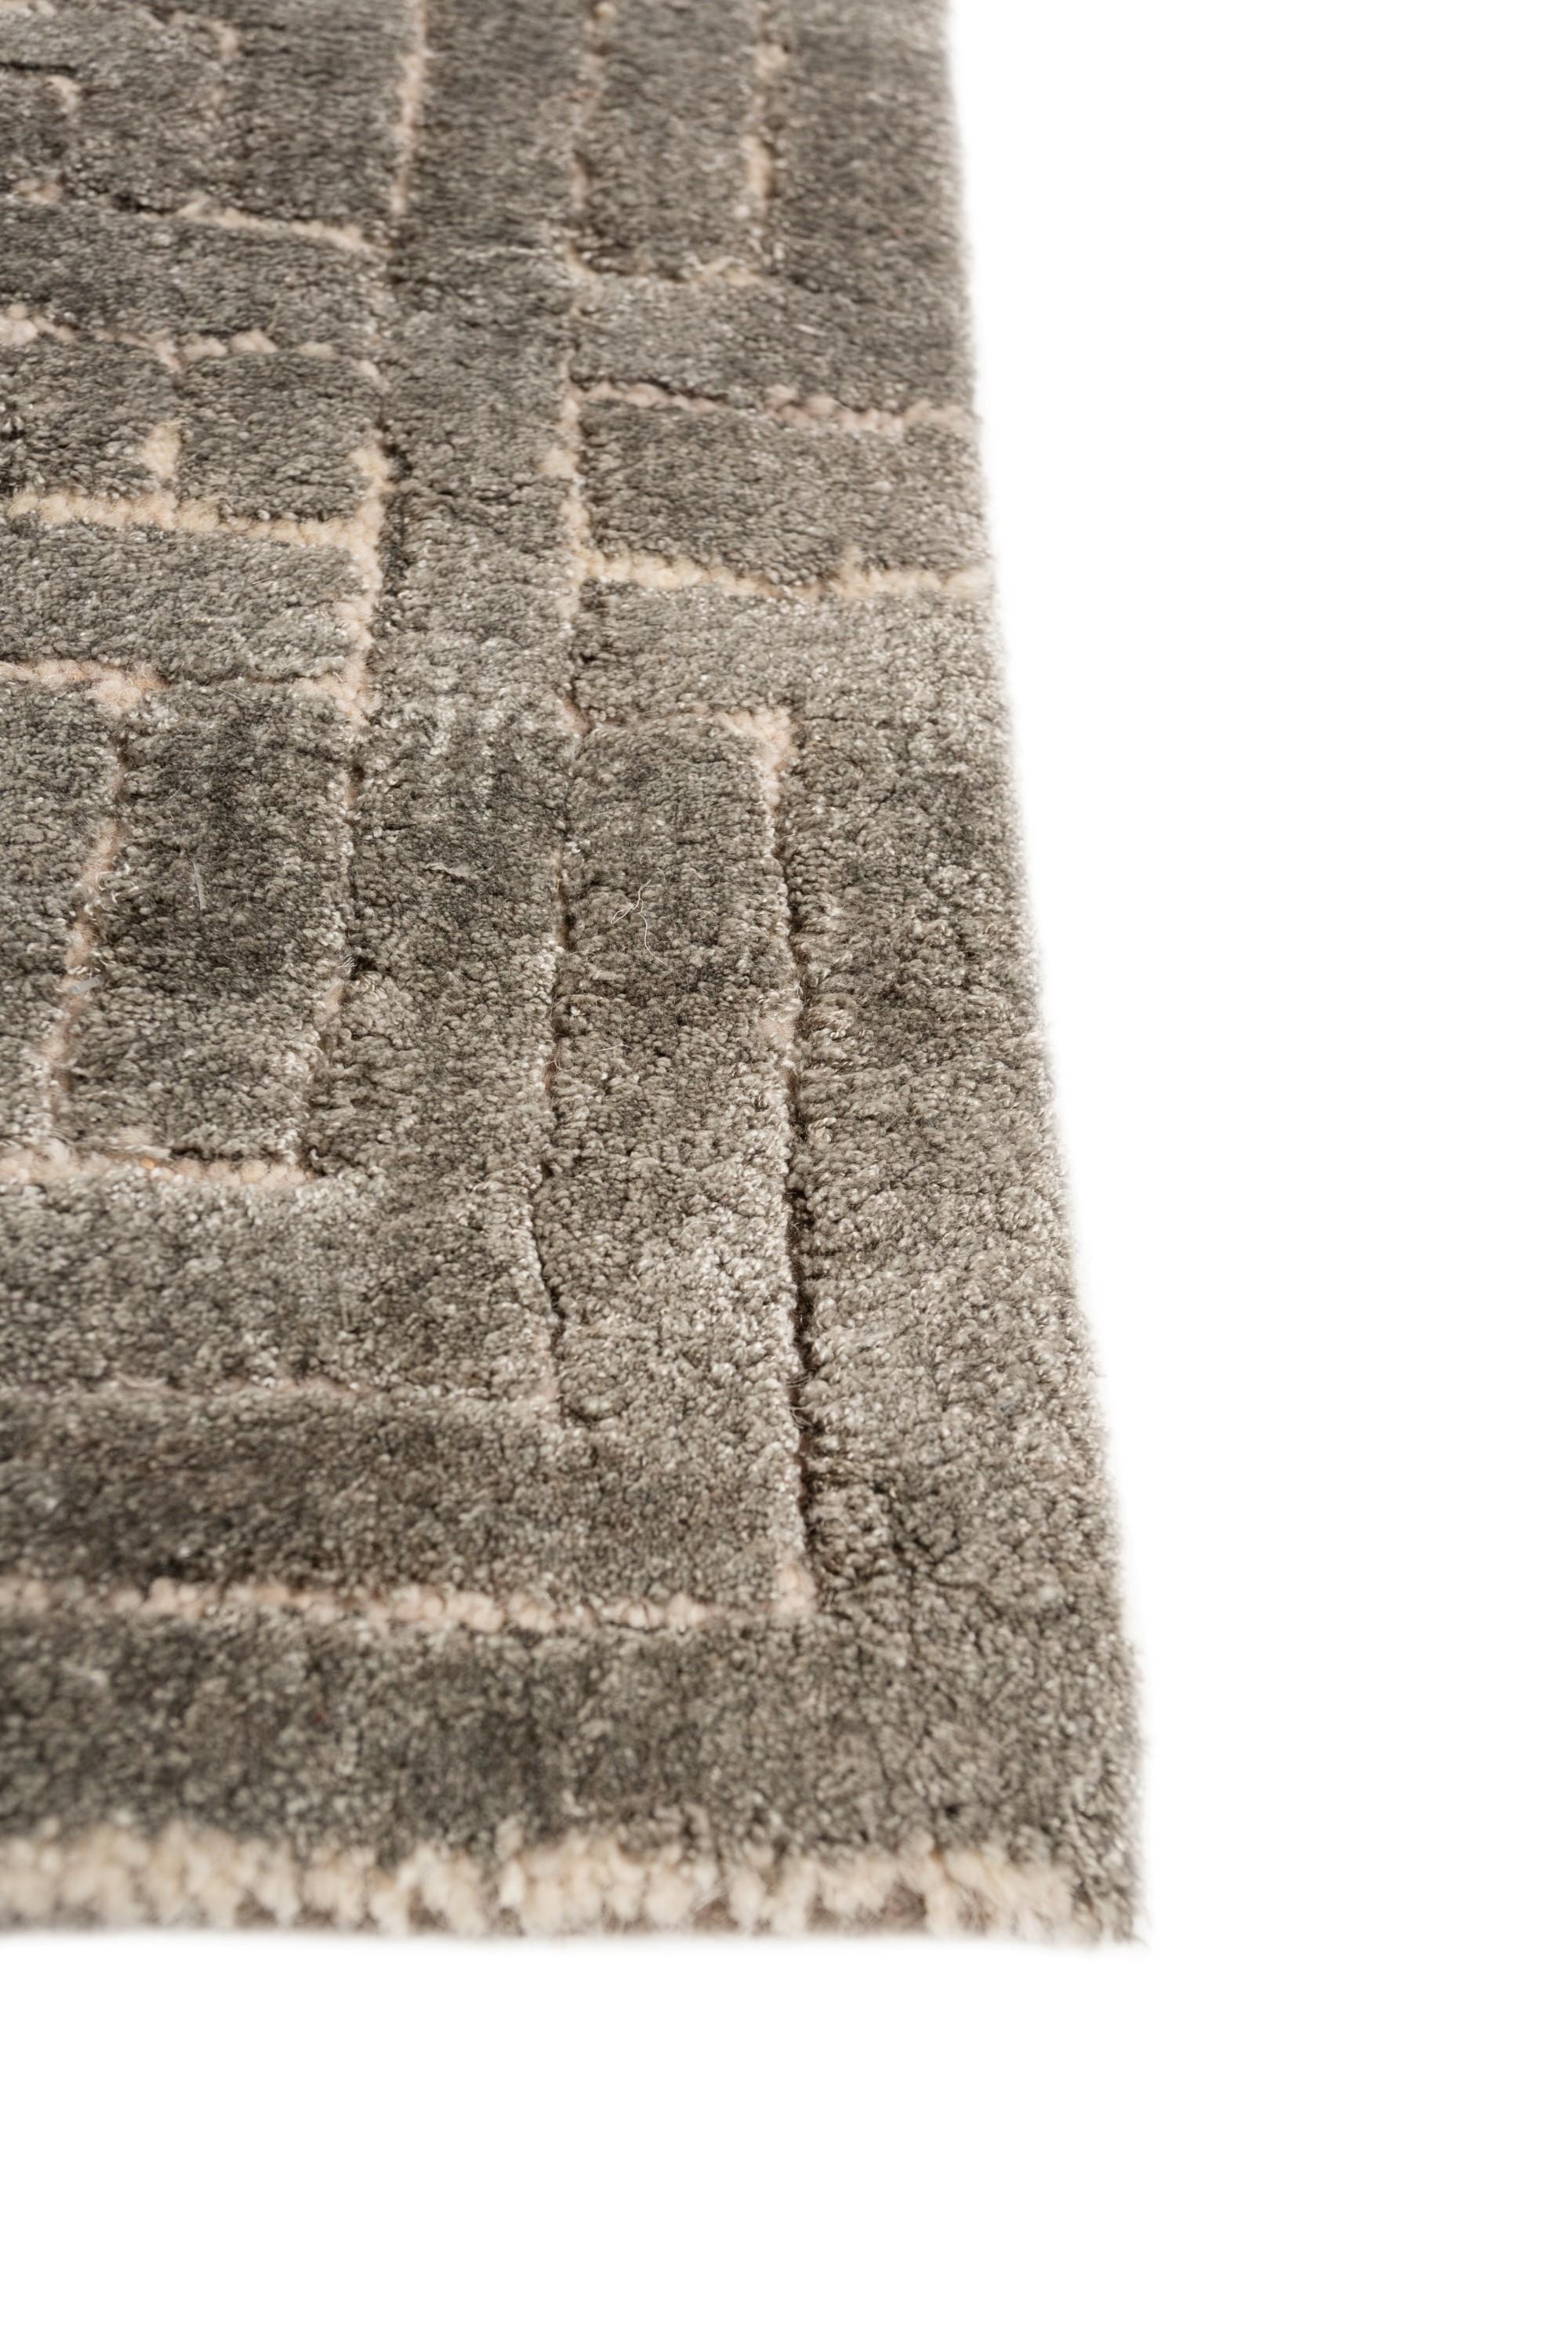 Are you searching for a rug that effortlessly transforms your space? Introducing this modern, hand-knotted masterpiece . With its sophisticated tone-on-tone palette of sealskin and flax, this rug instantly uplifts any mood, adding warmth and comfort